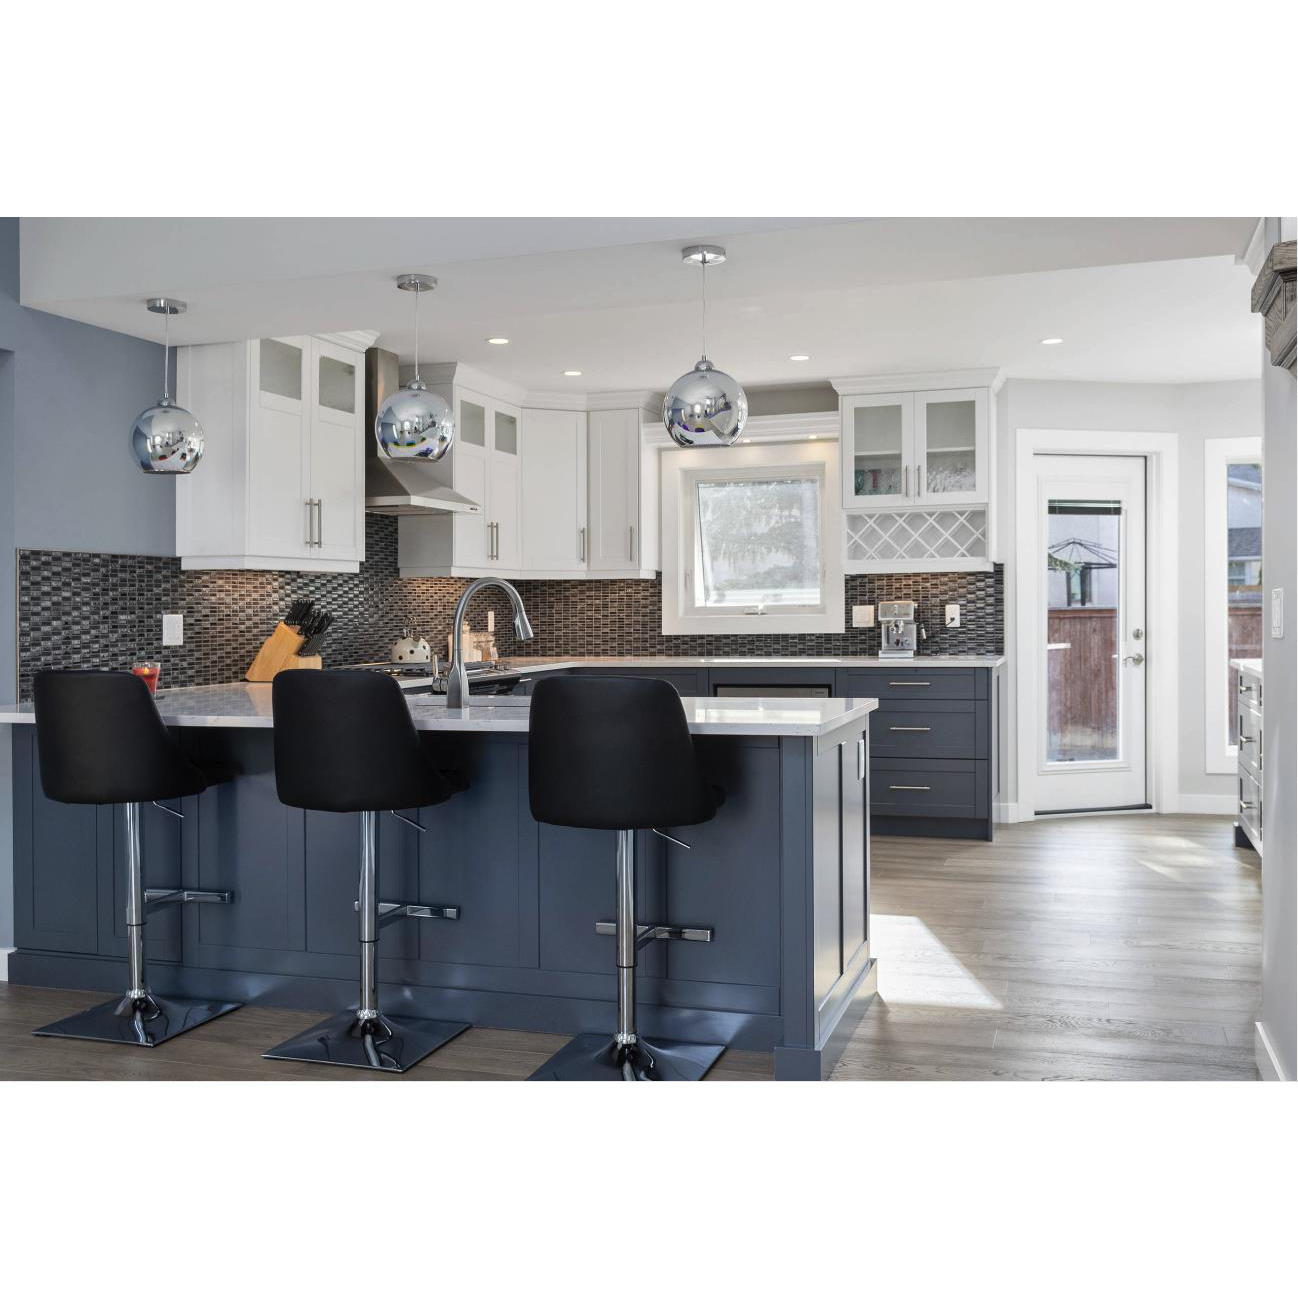 AisDecor new gray cabinets kitchen one-stop services-2